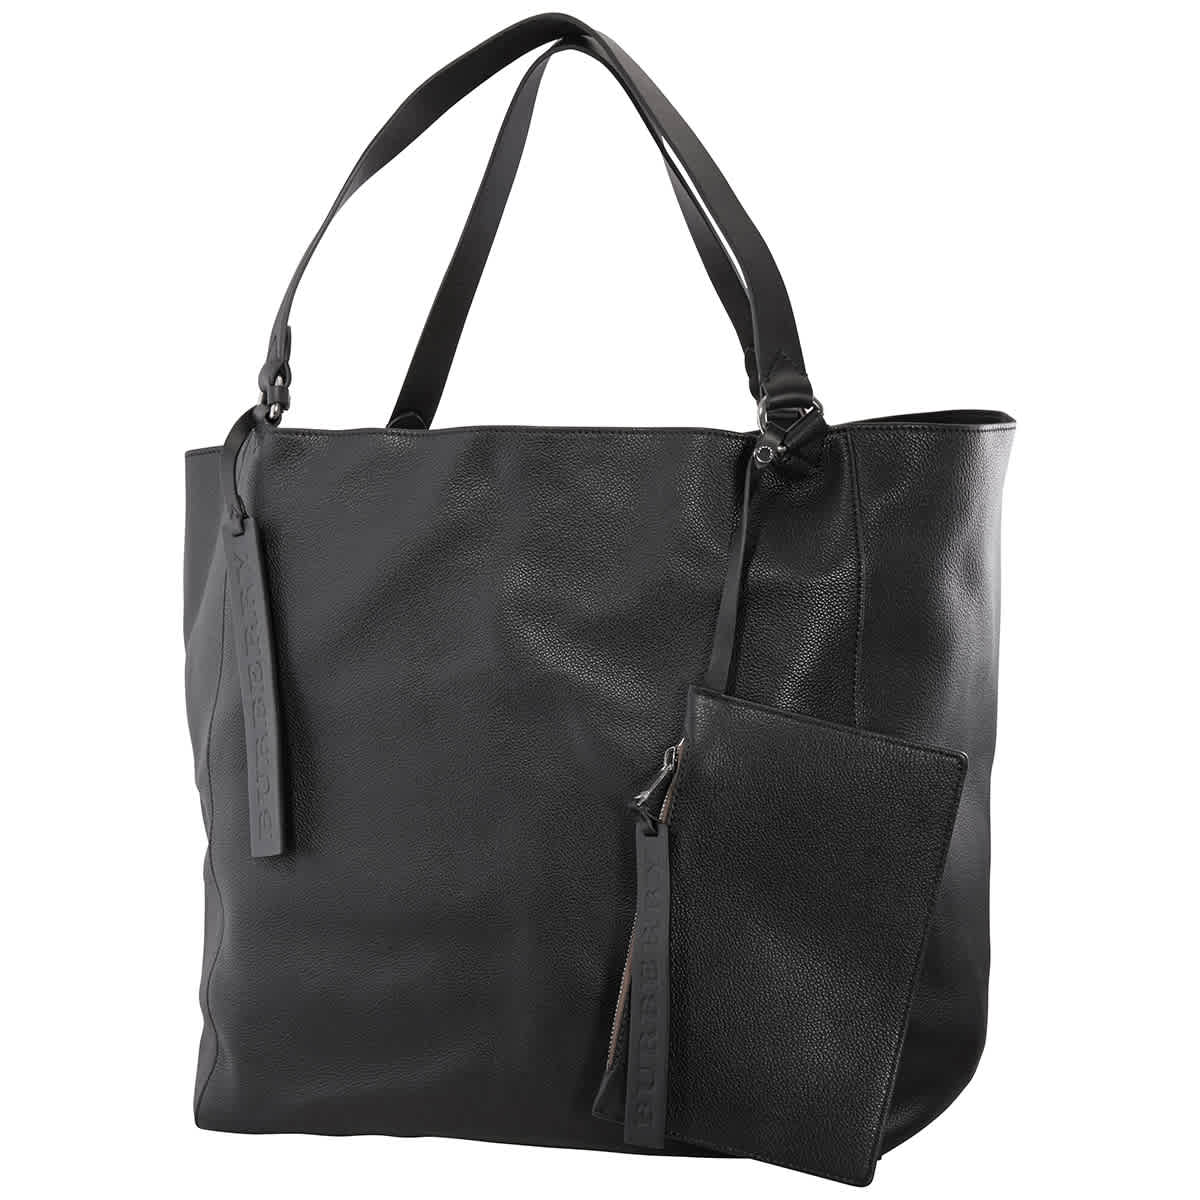 Burberry Large Embossed Crest Bonded Leather Tote In Black